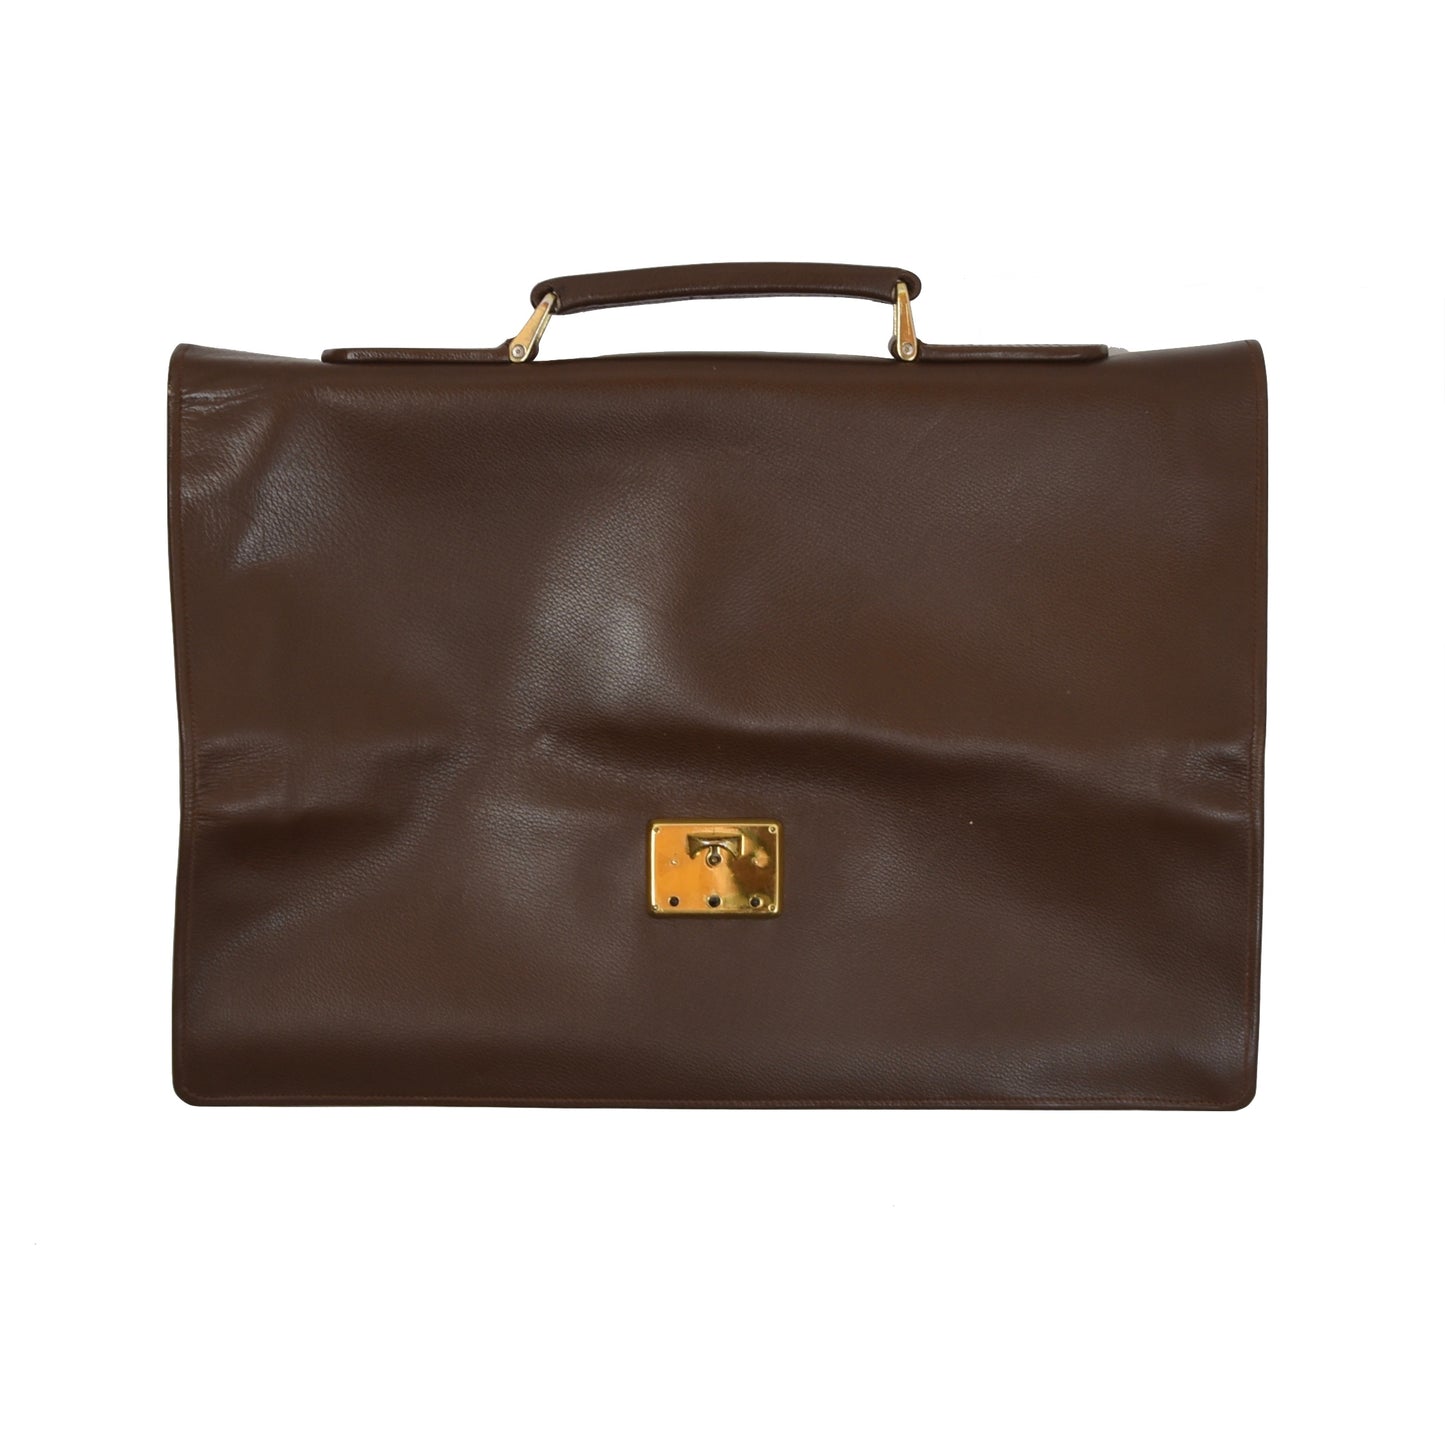 Foldable Leather Travel Briefcase - Brown